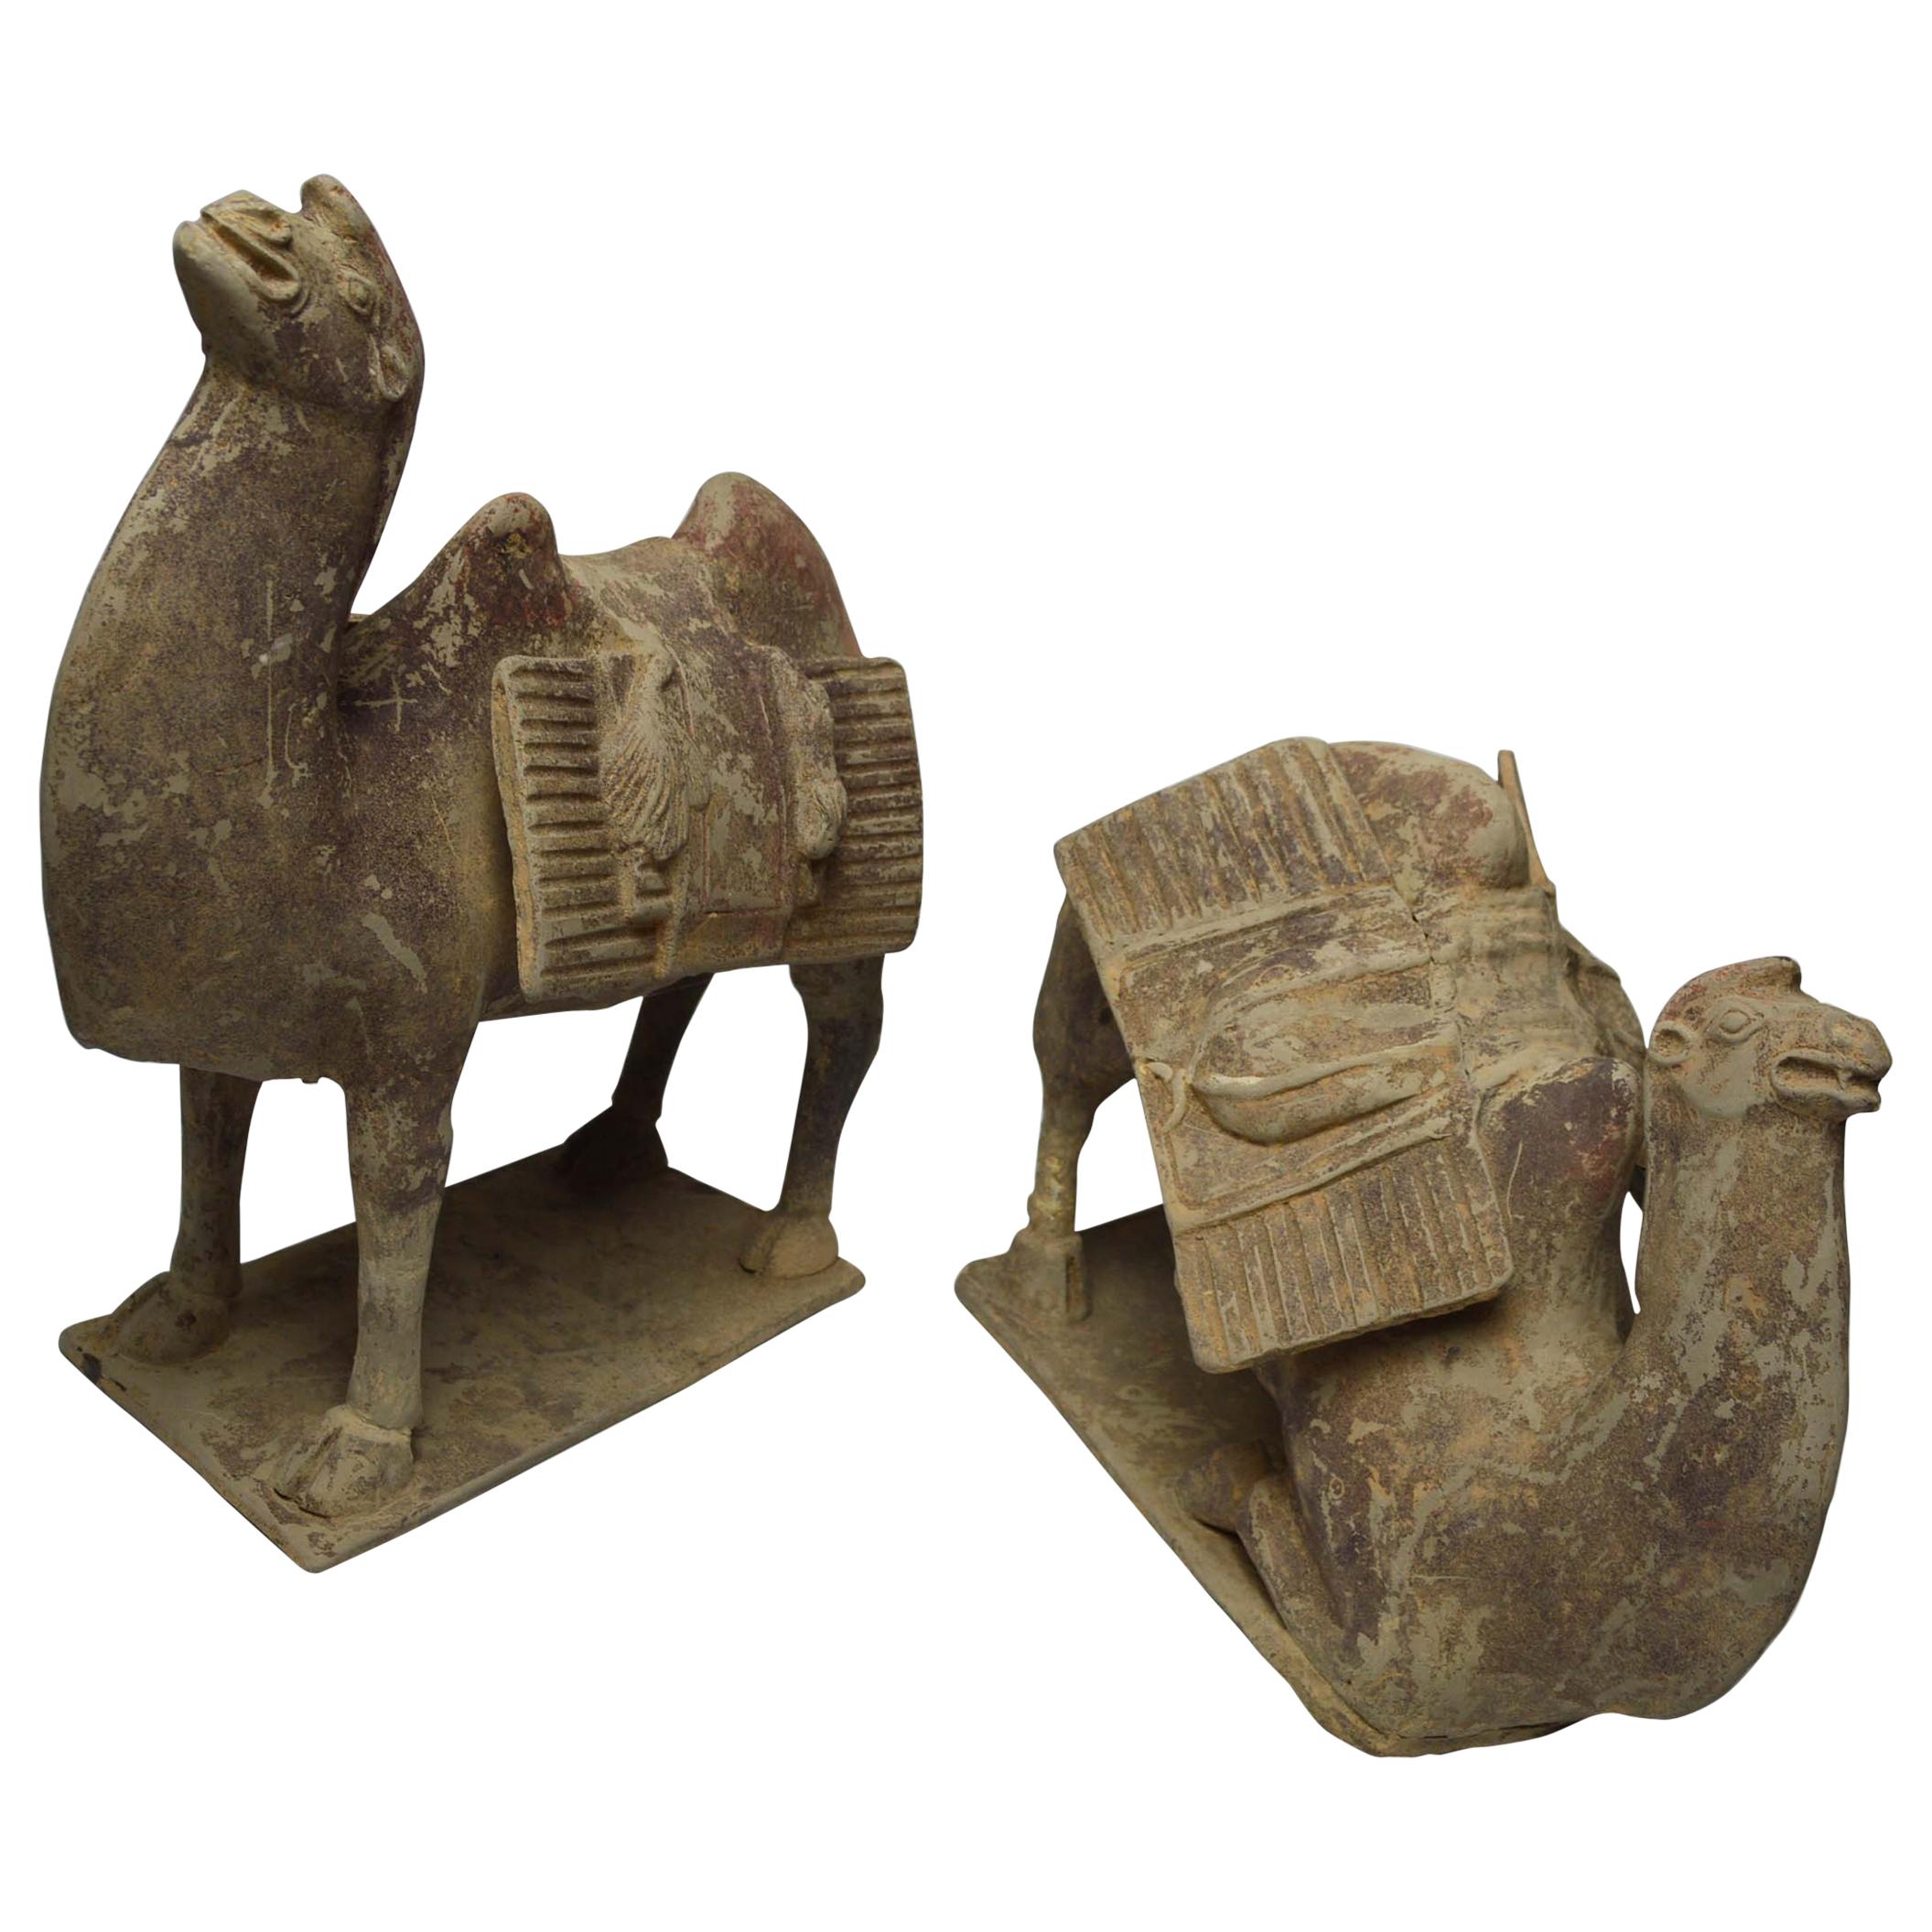 Asian Chinese Art Antique Bactrian Camels circa 15th Century Ex Christie's HK